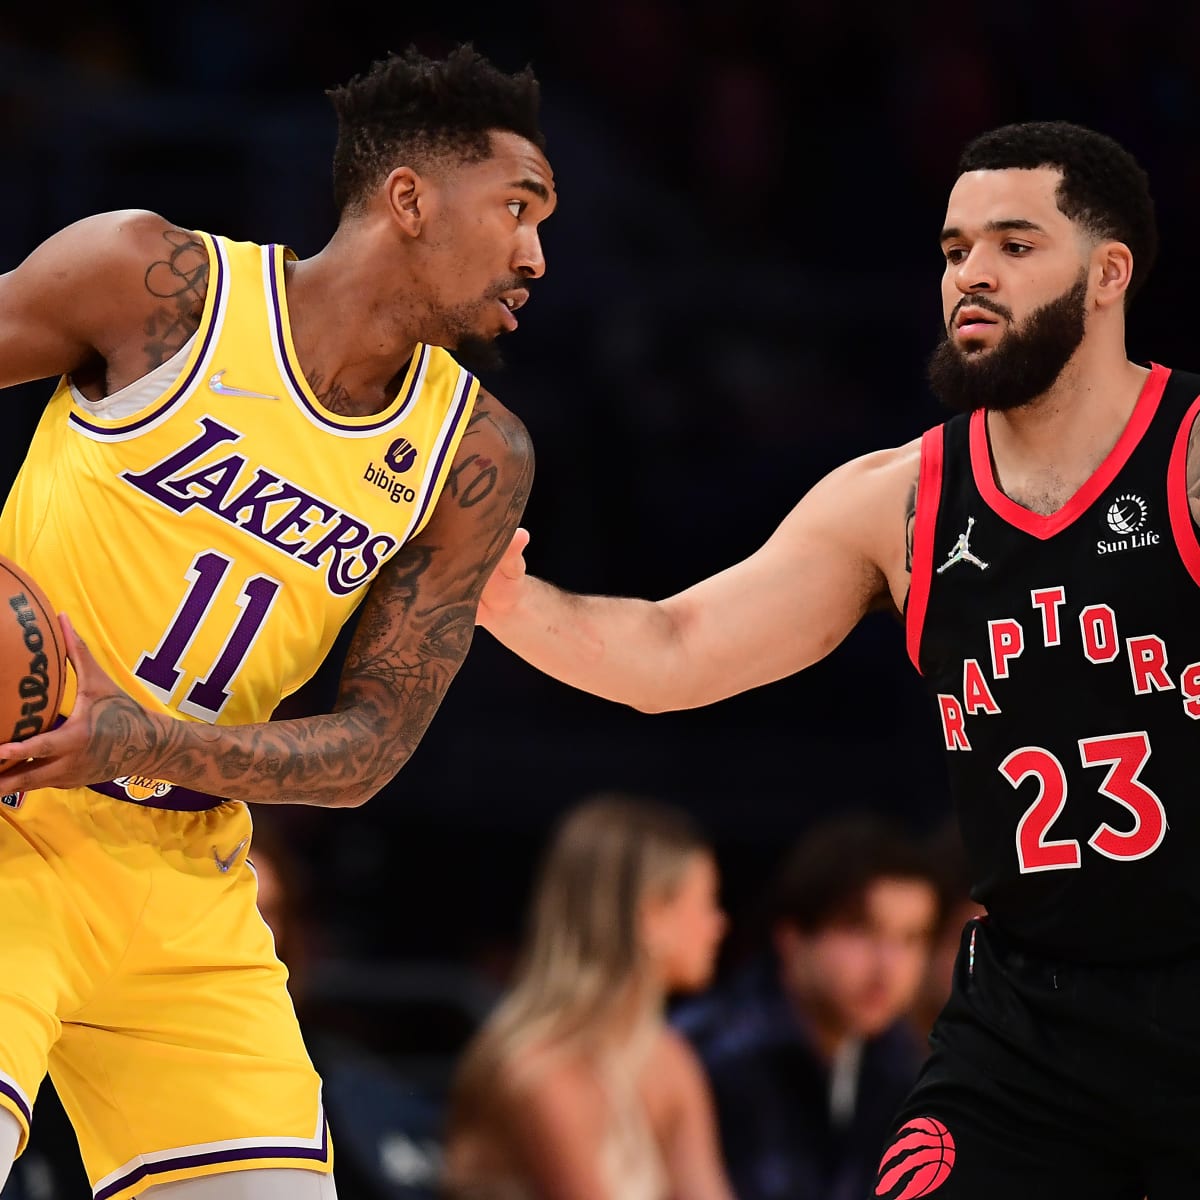 Wayne Ellington discusses how the Lakers' frontcourt will help guards